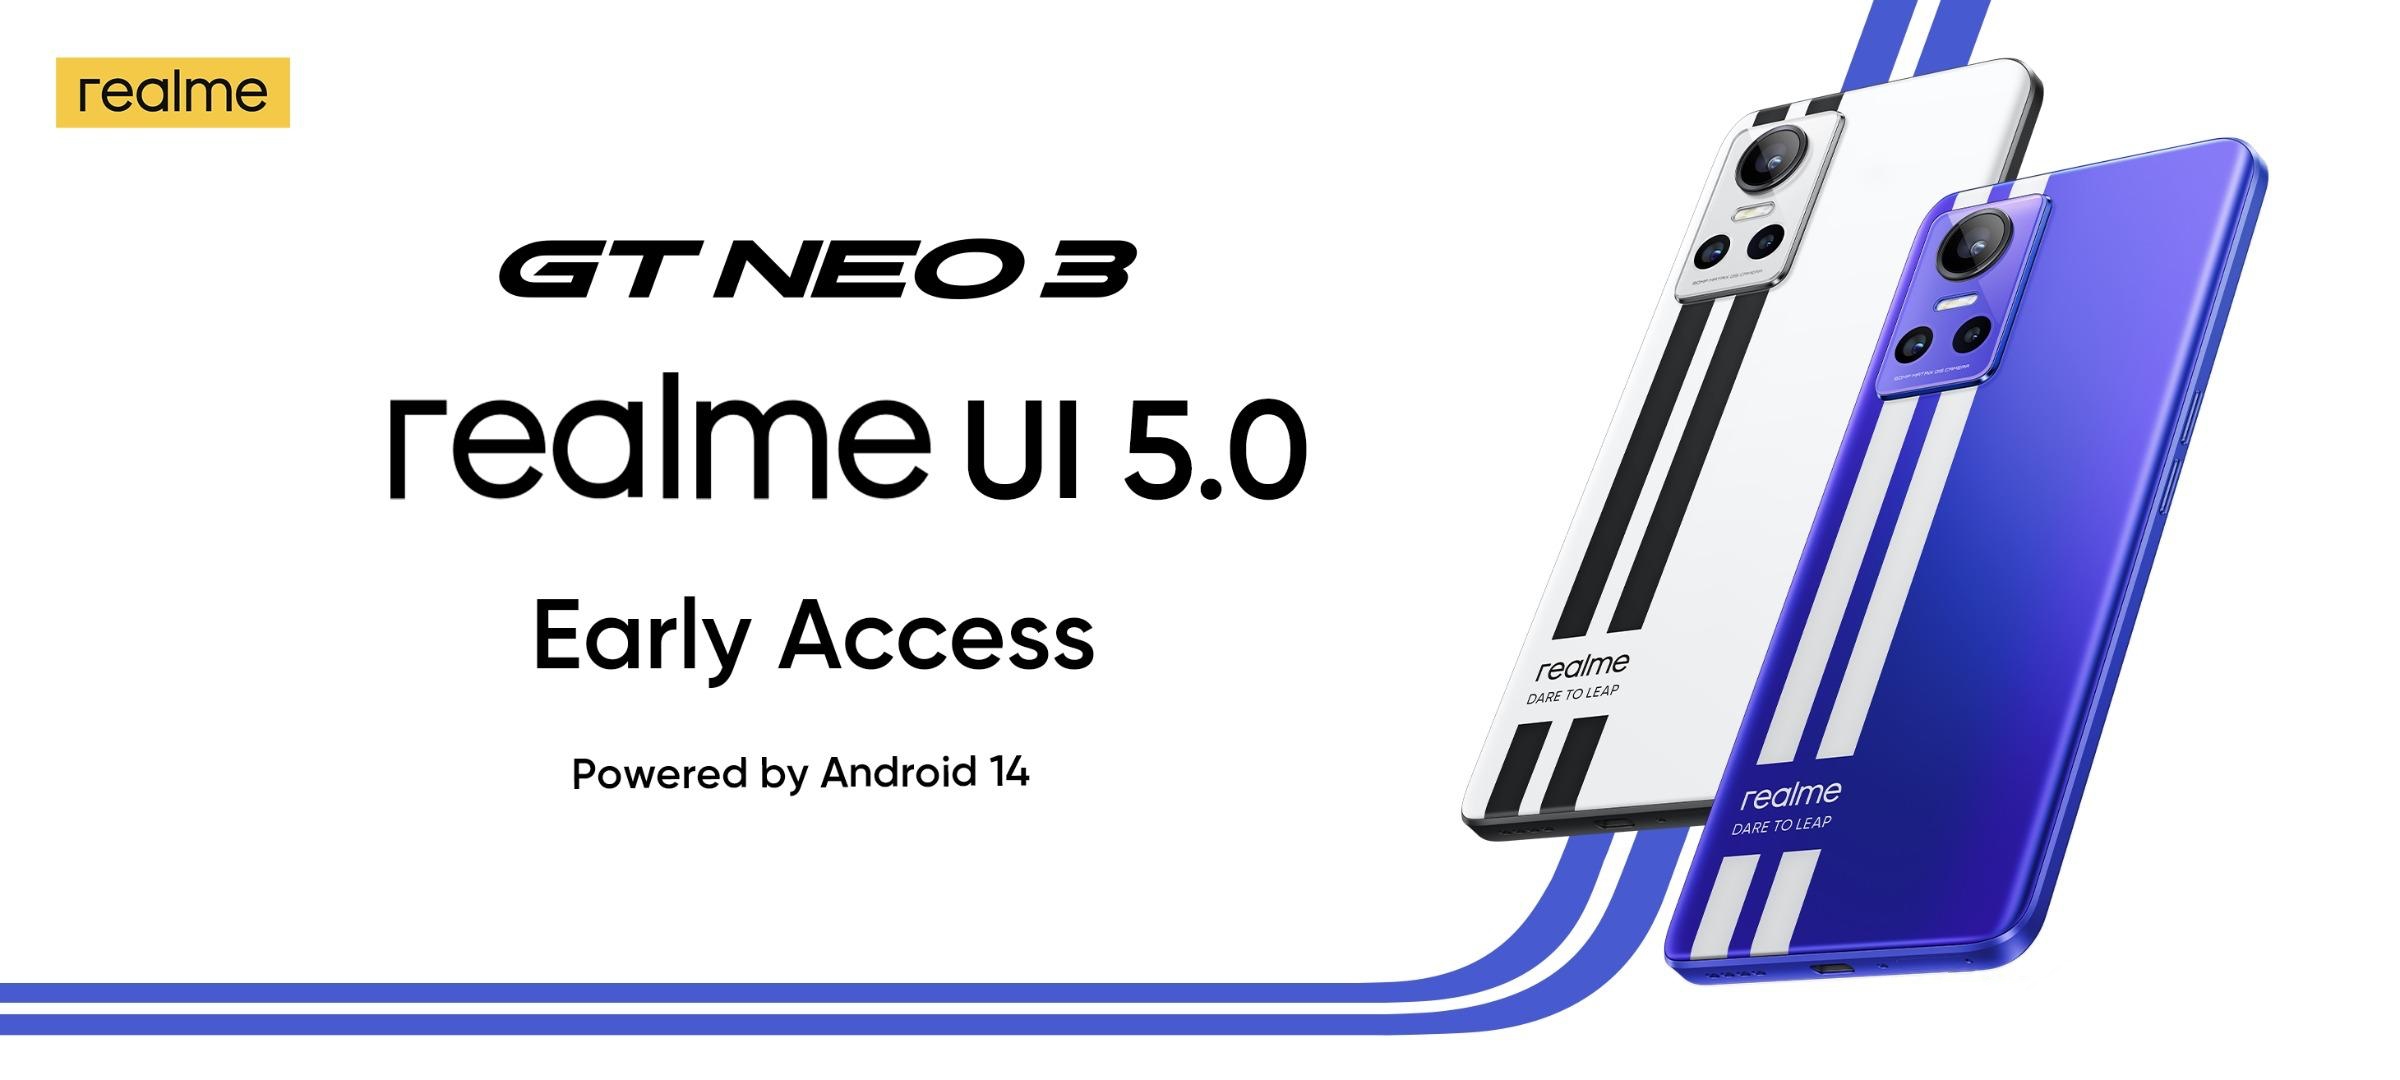 realme has announced the realme UI 5.0 Android 14-based realme UI 5.0 testing programme for the realme GT Neo 3 and realme GT Neo 3 150W